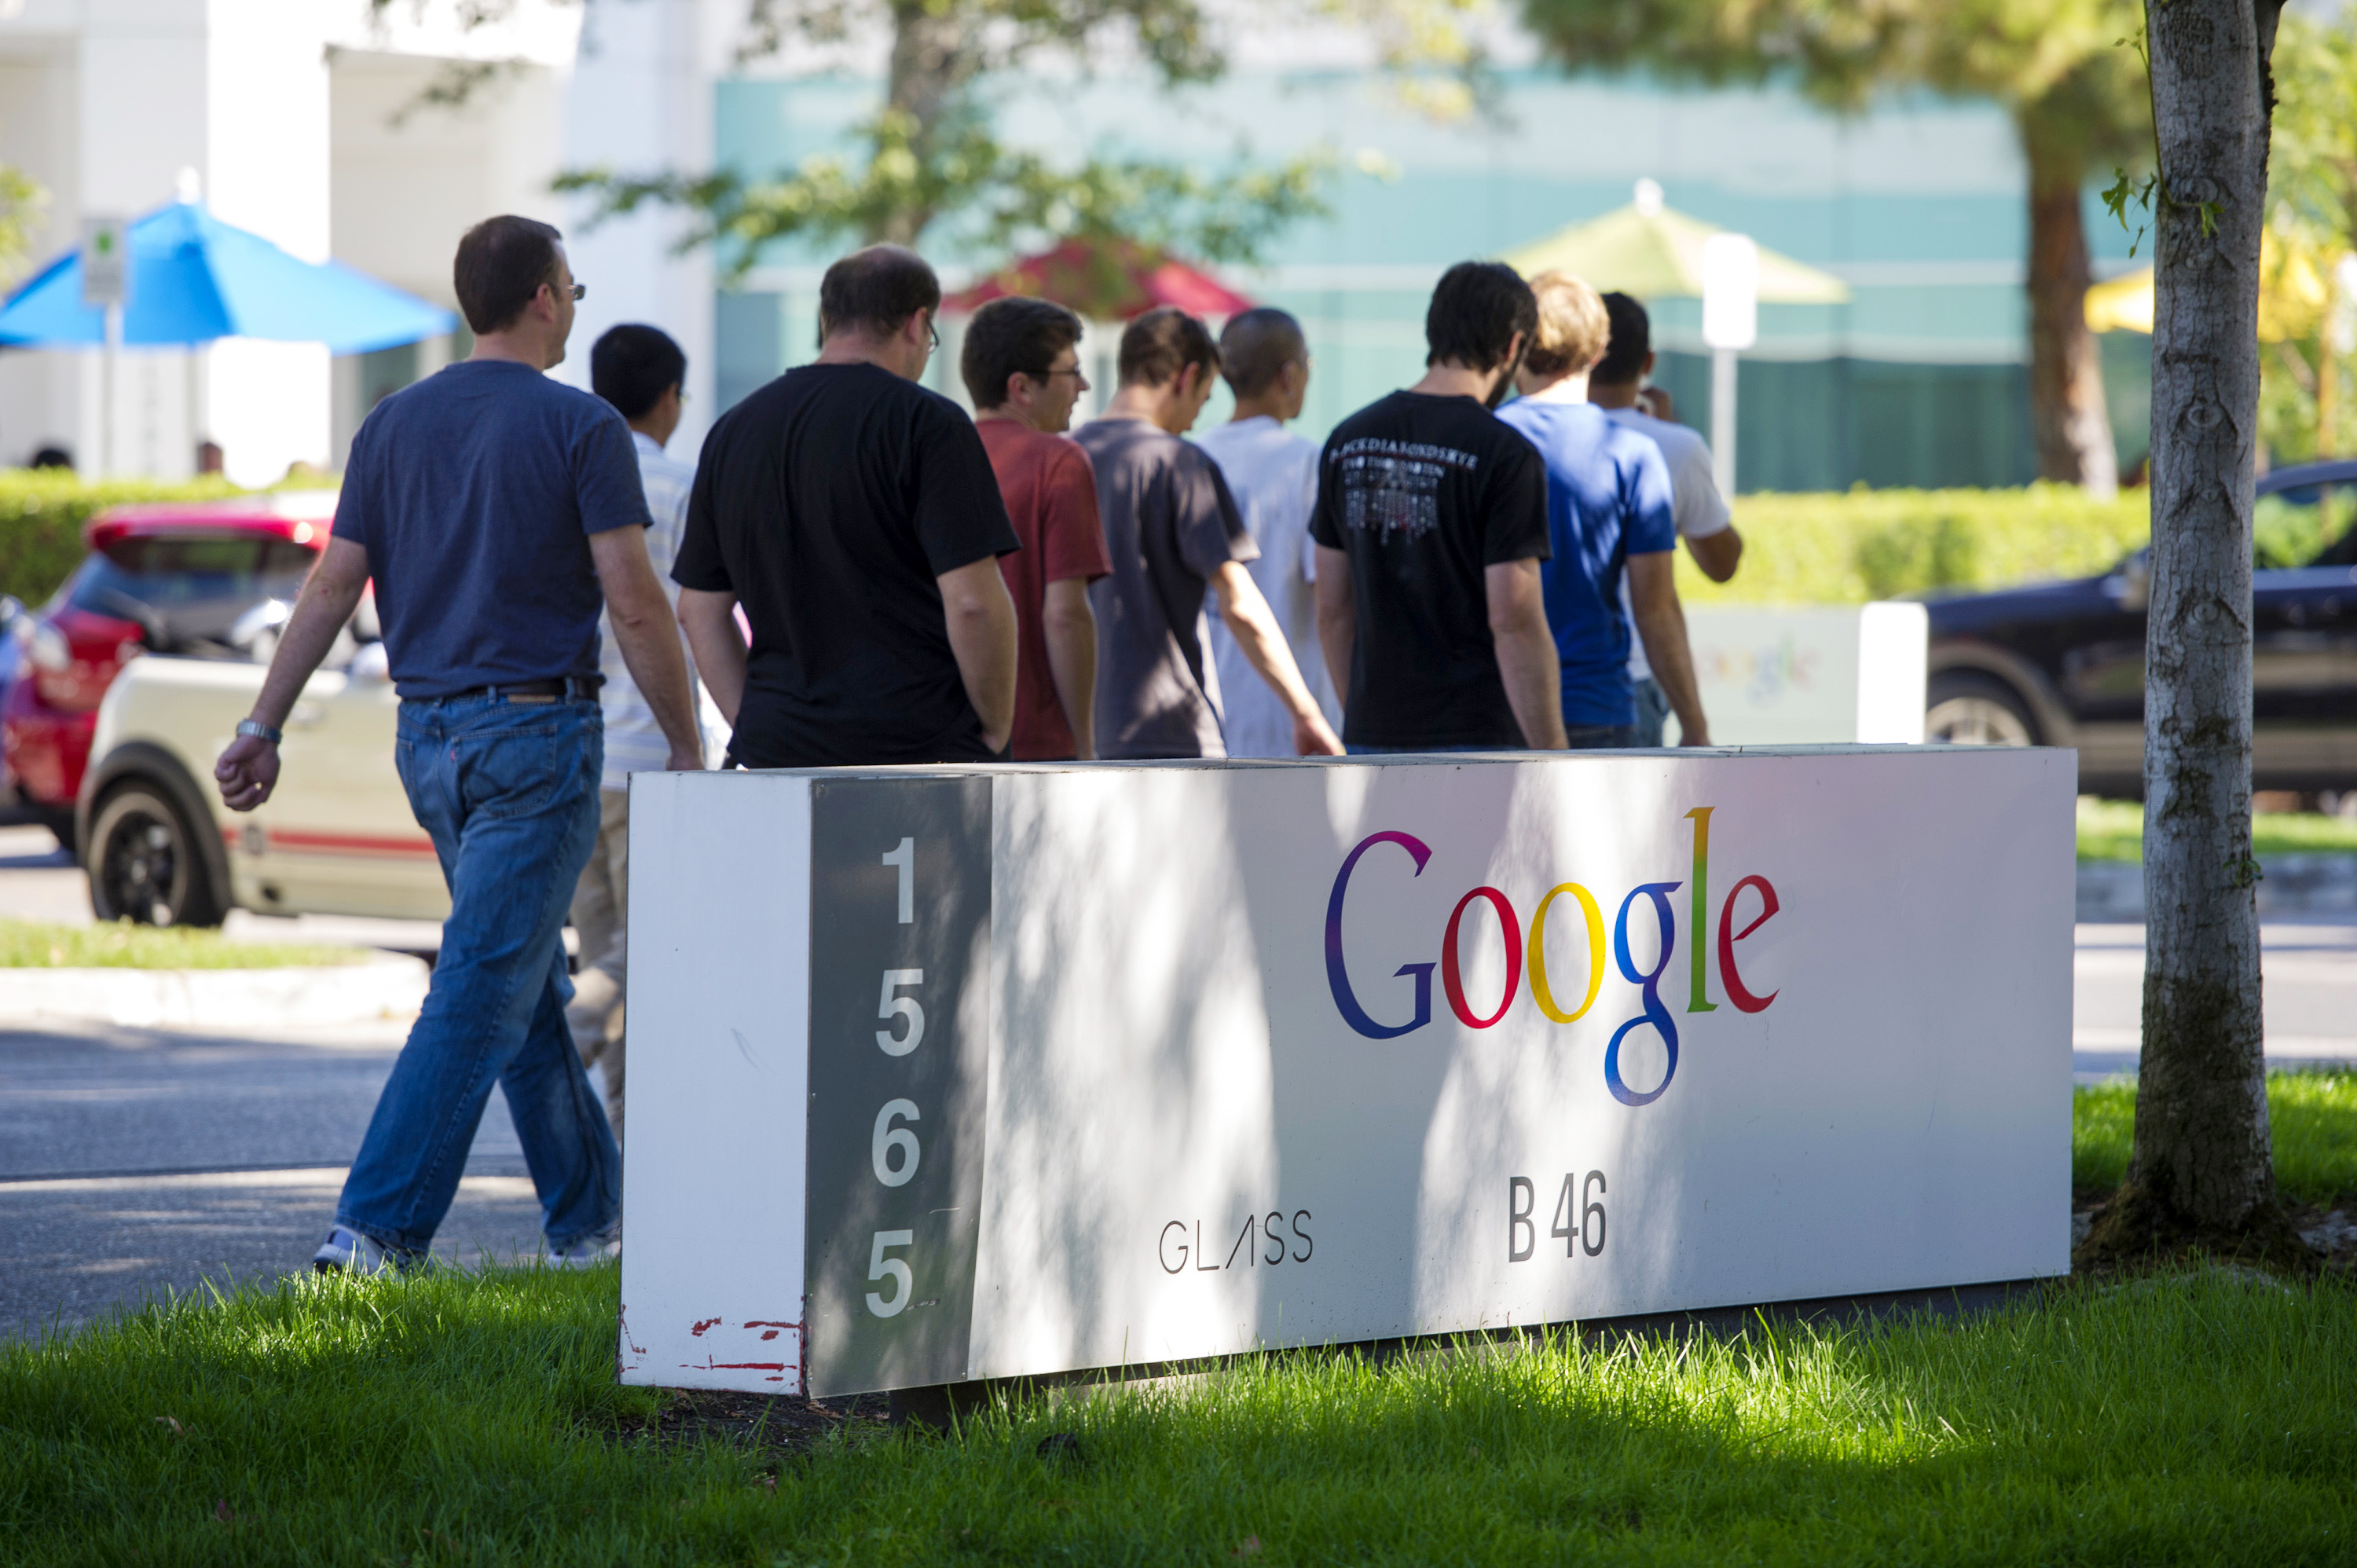 Pedestrians walk past Google Inc. signage displayed in front of the company's headquarters in Mountain View, Calif. on Sept. 27, 2013. (David Paul Morris—Bloomberg/Getty Images)